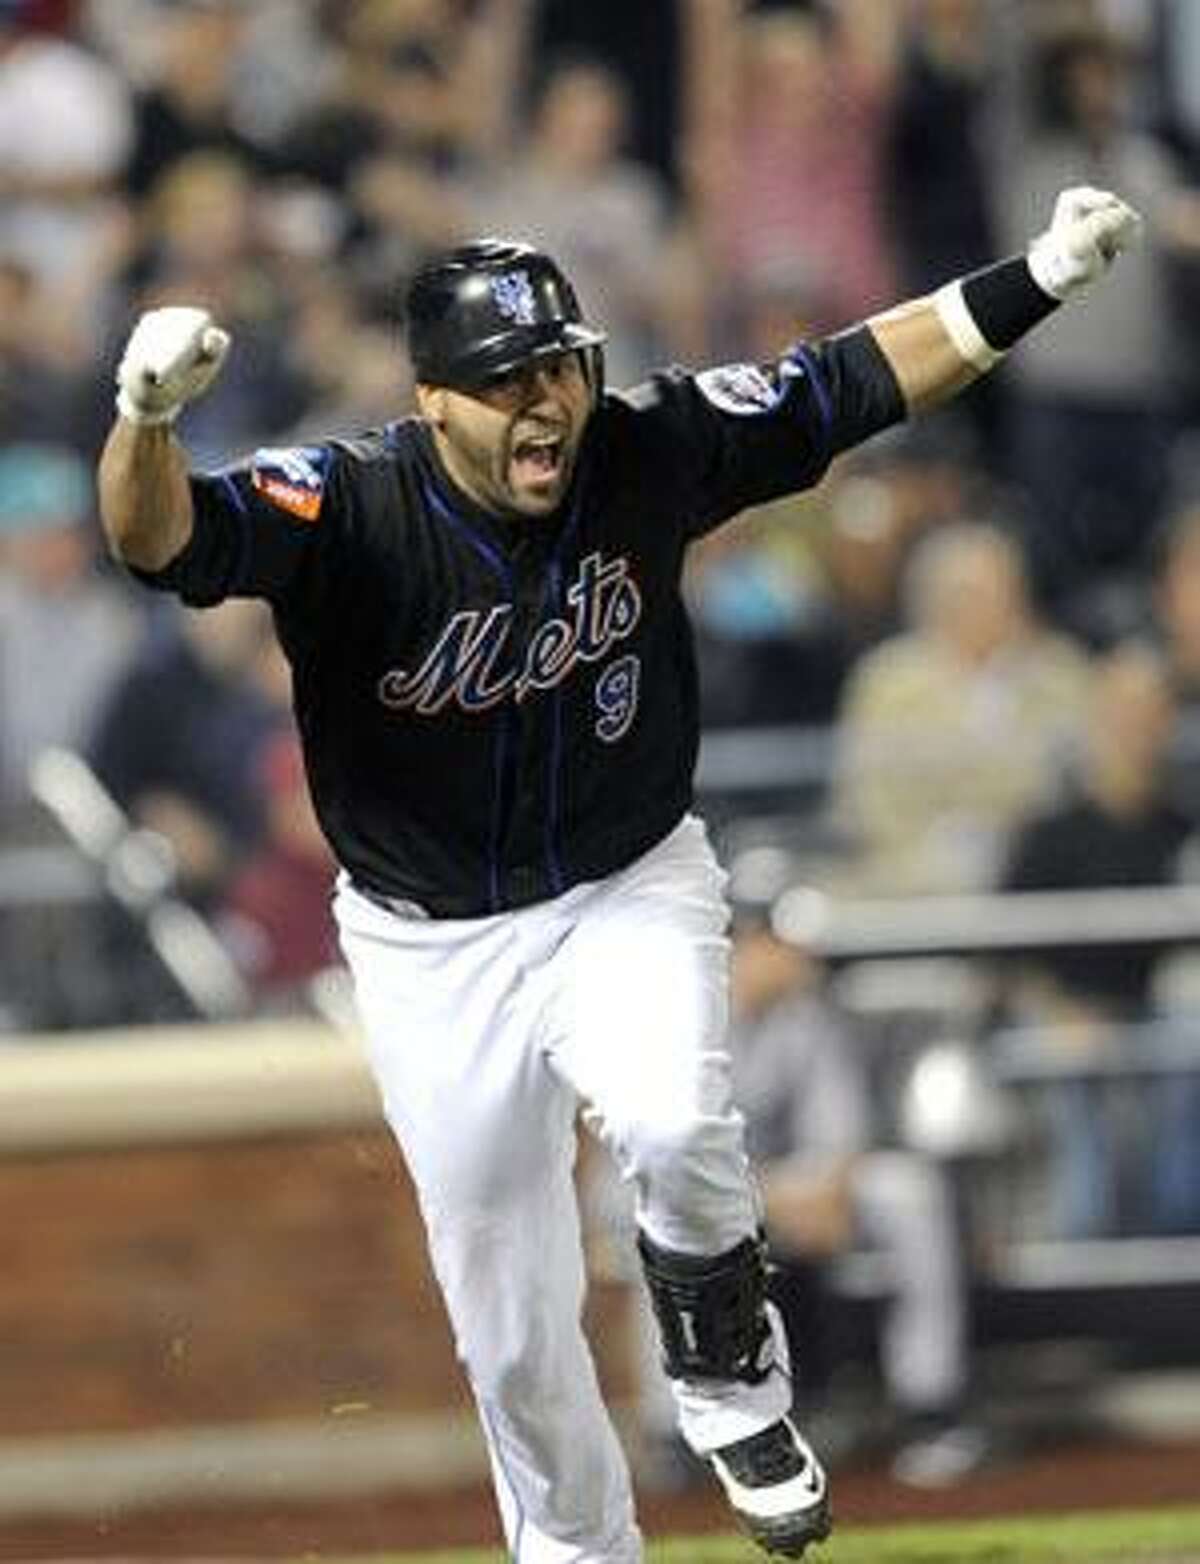 NY Mets looking for first win in the black jerseys this year